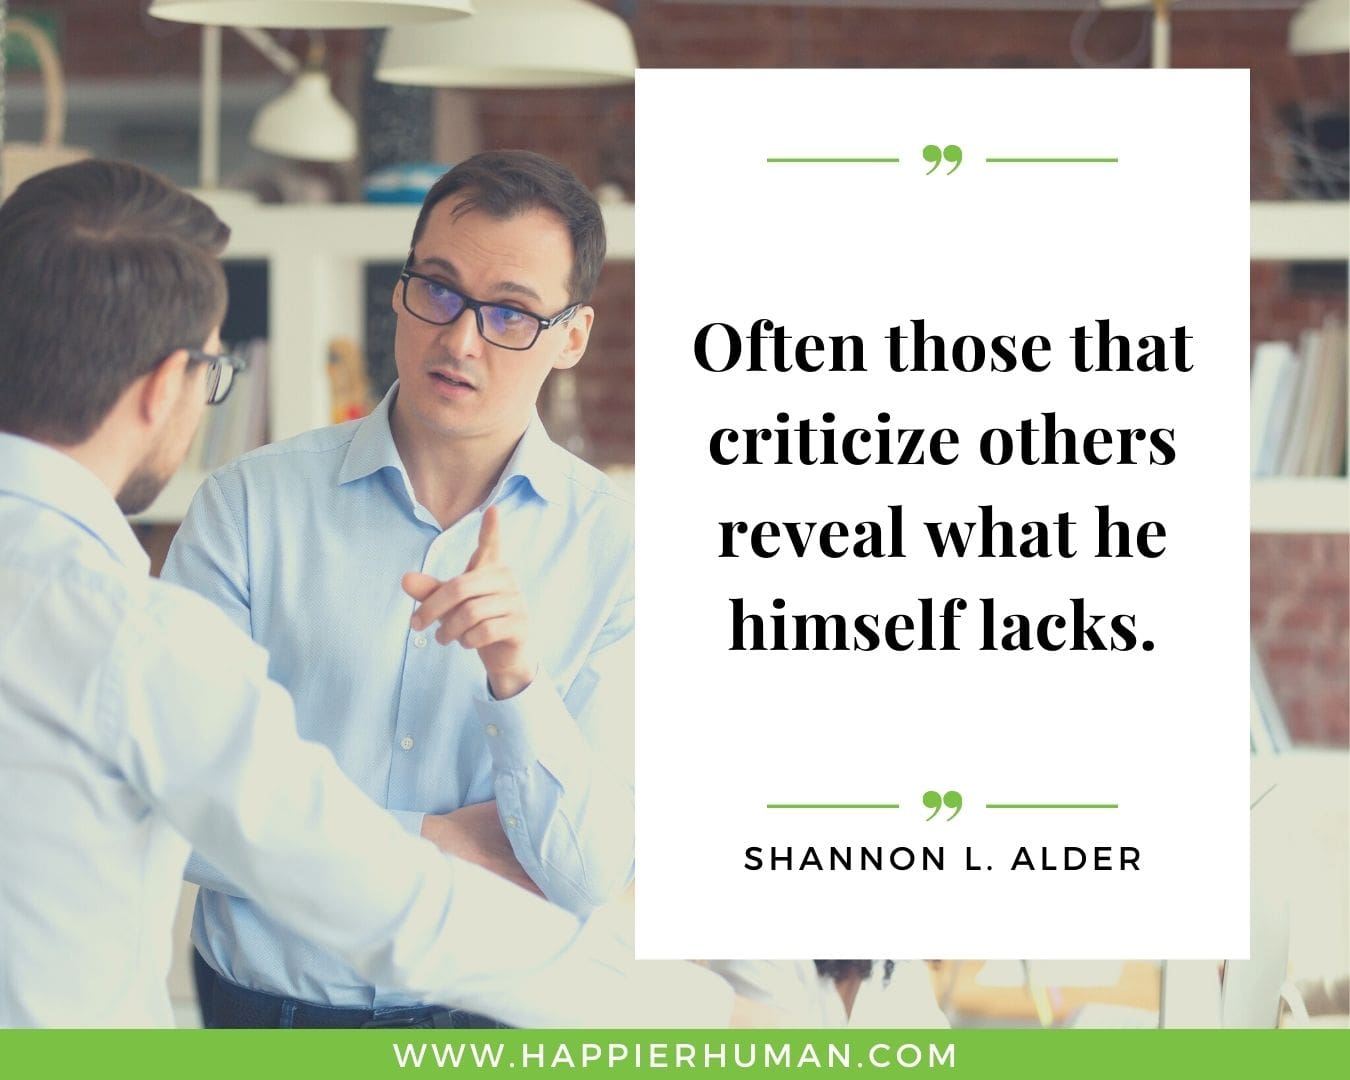 Haters Quotes - “Often those that criticize others reveal what he himself lacks.” - Shannon L. Alder